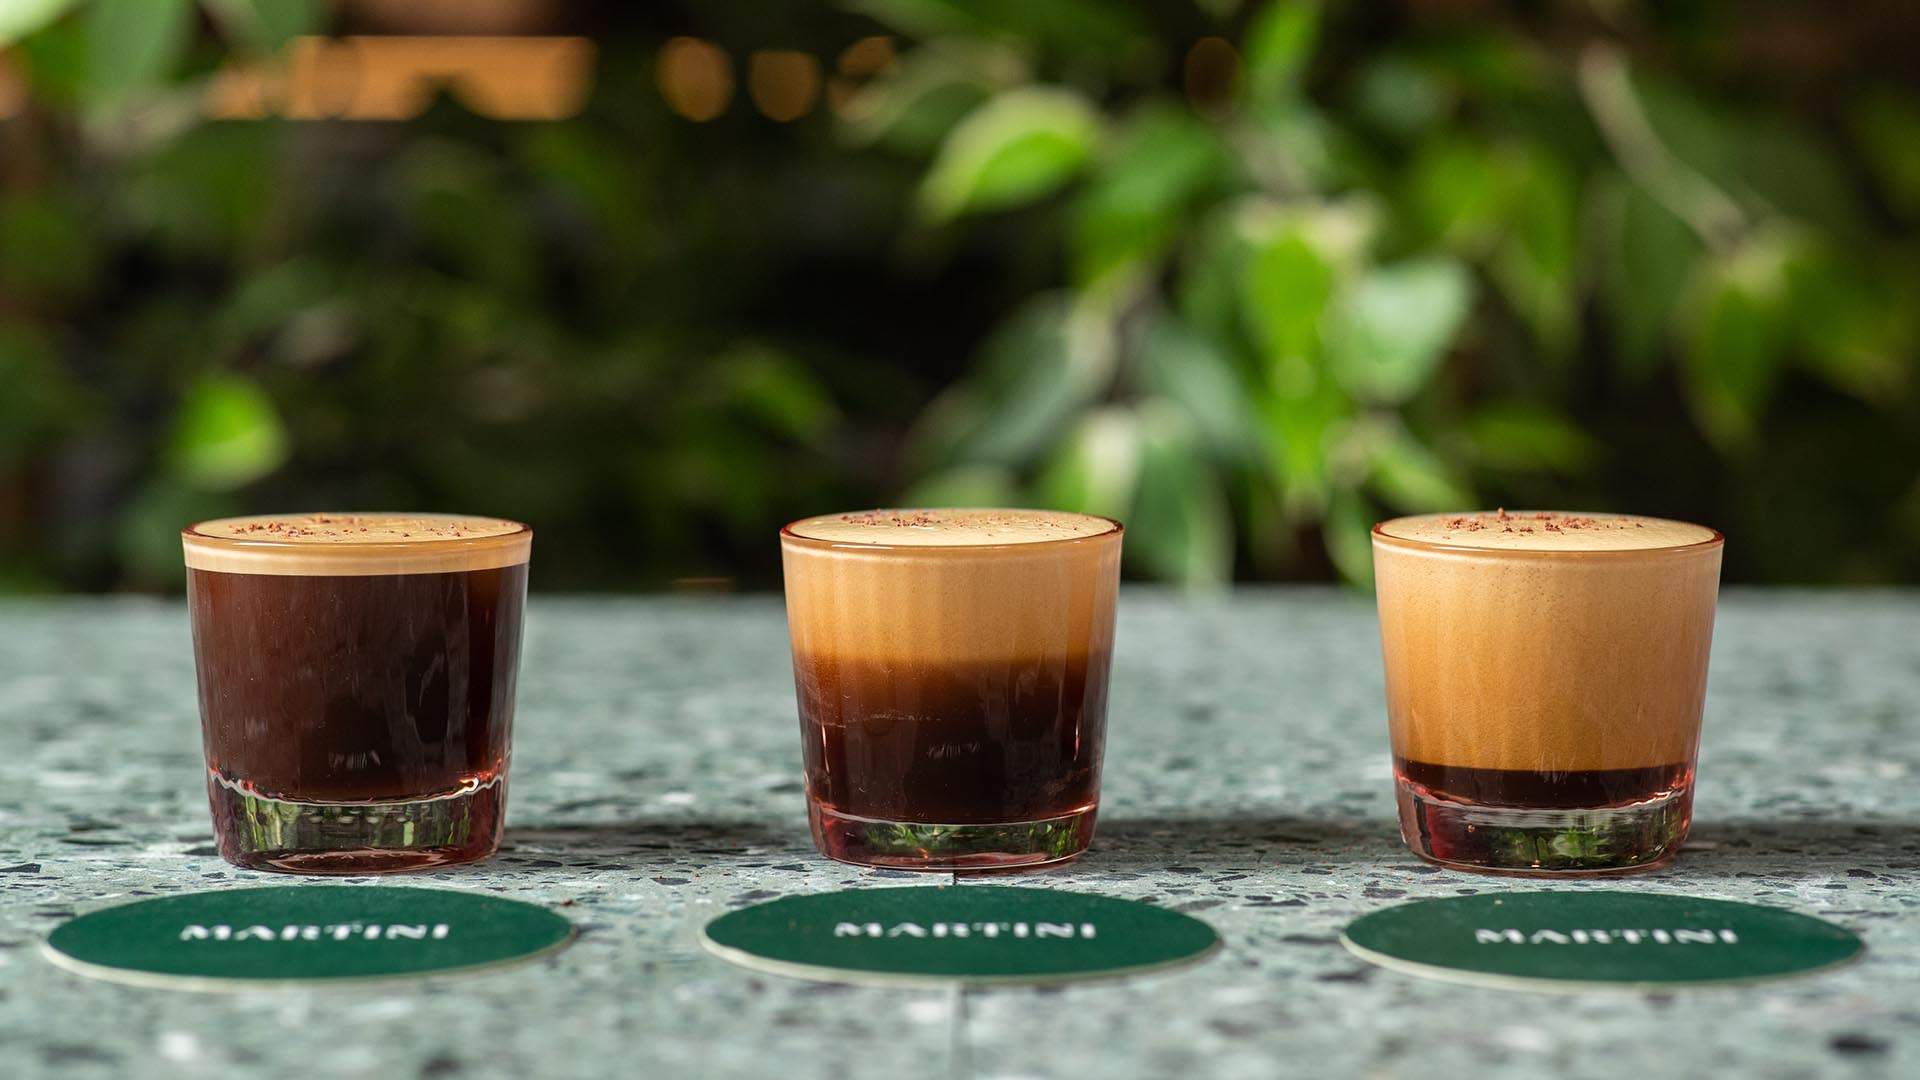 Sammy Junior Is the New CBD Espresso and Cocktail Bar From the Maybe Sammy Team